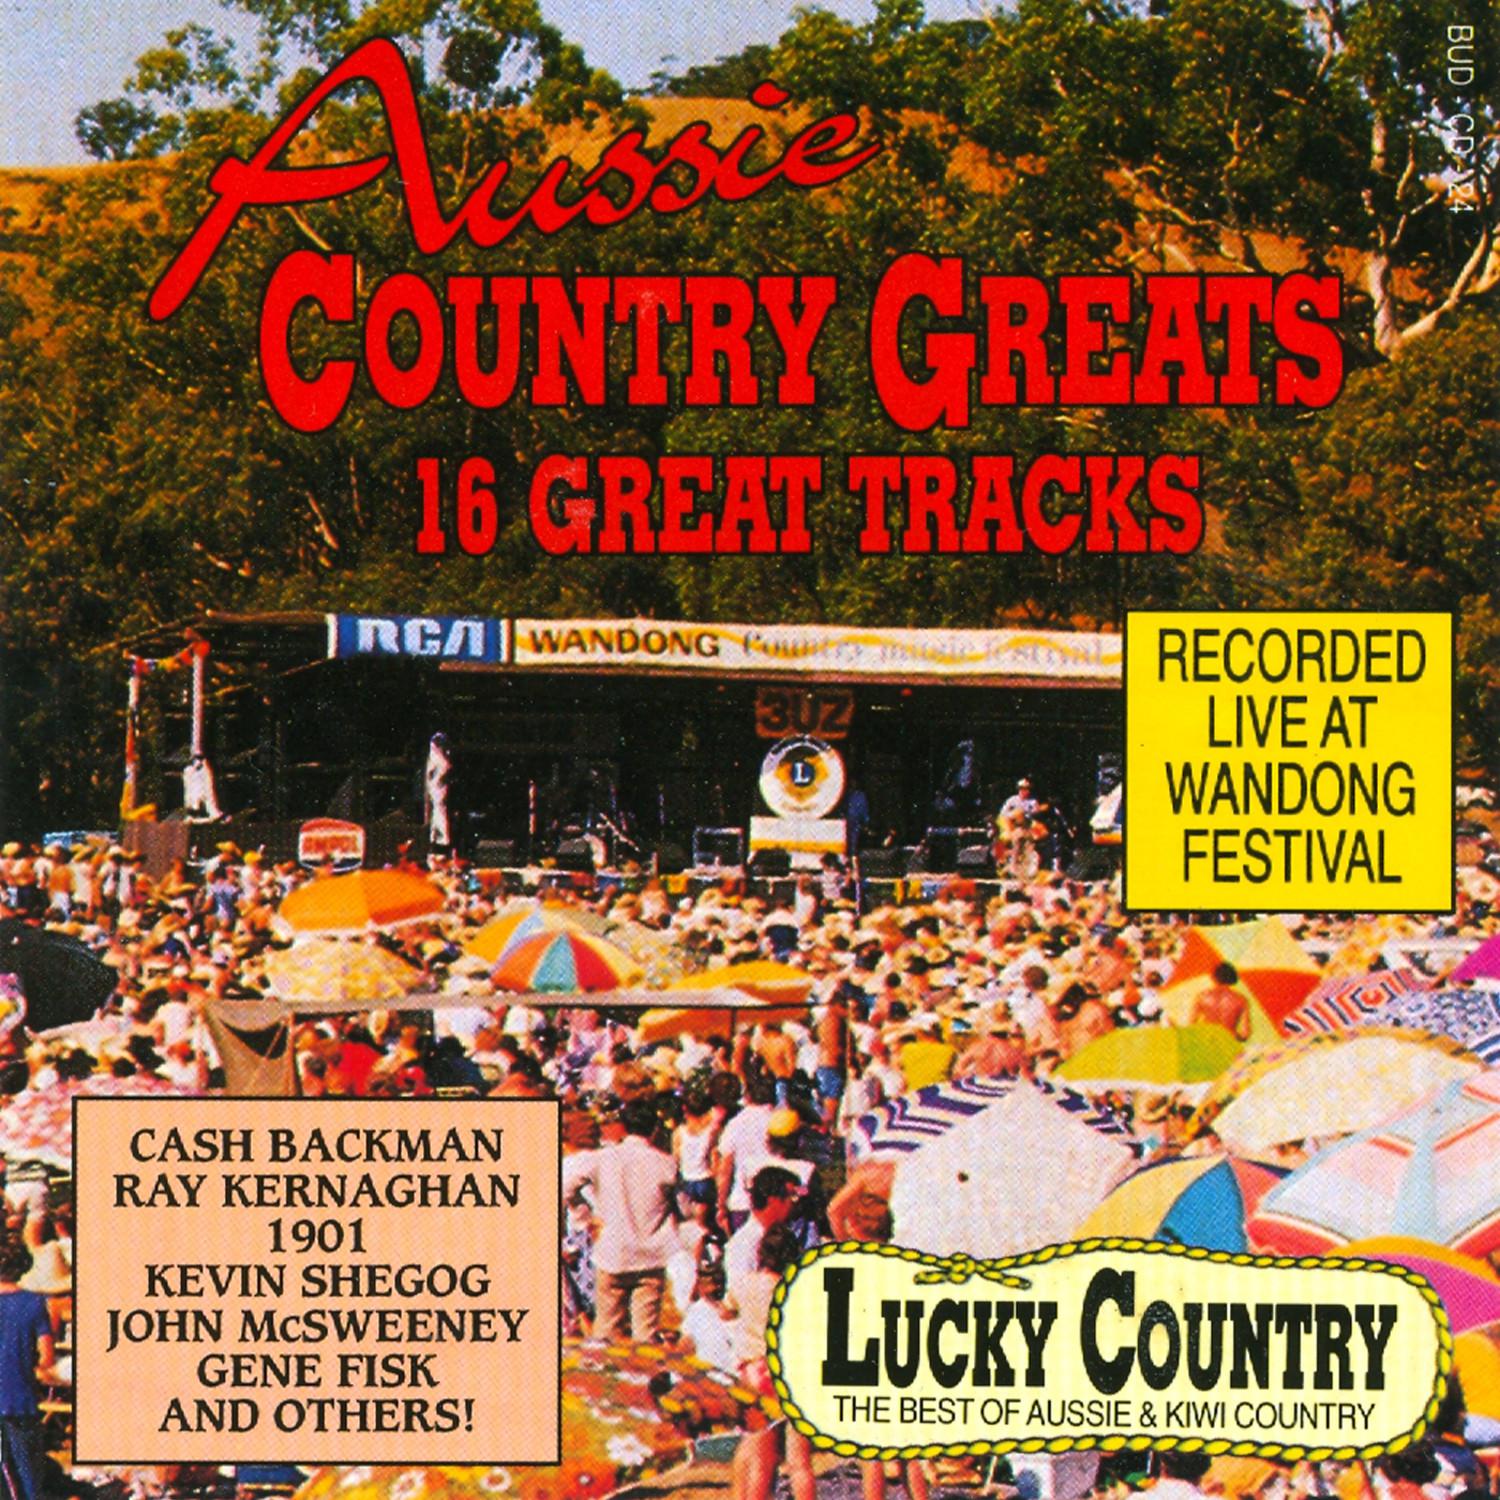 Aussie Country Greats